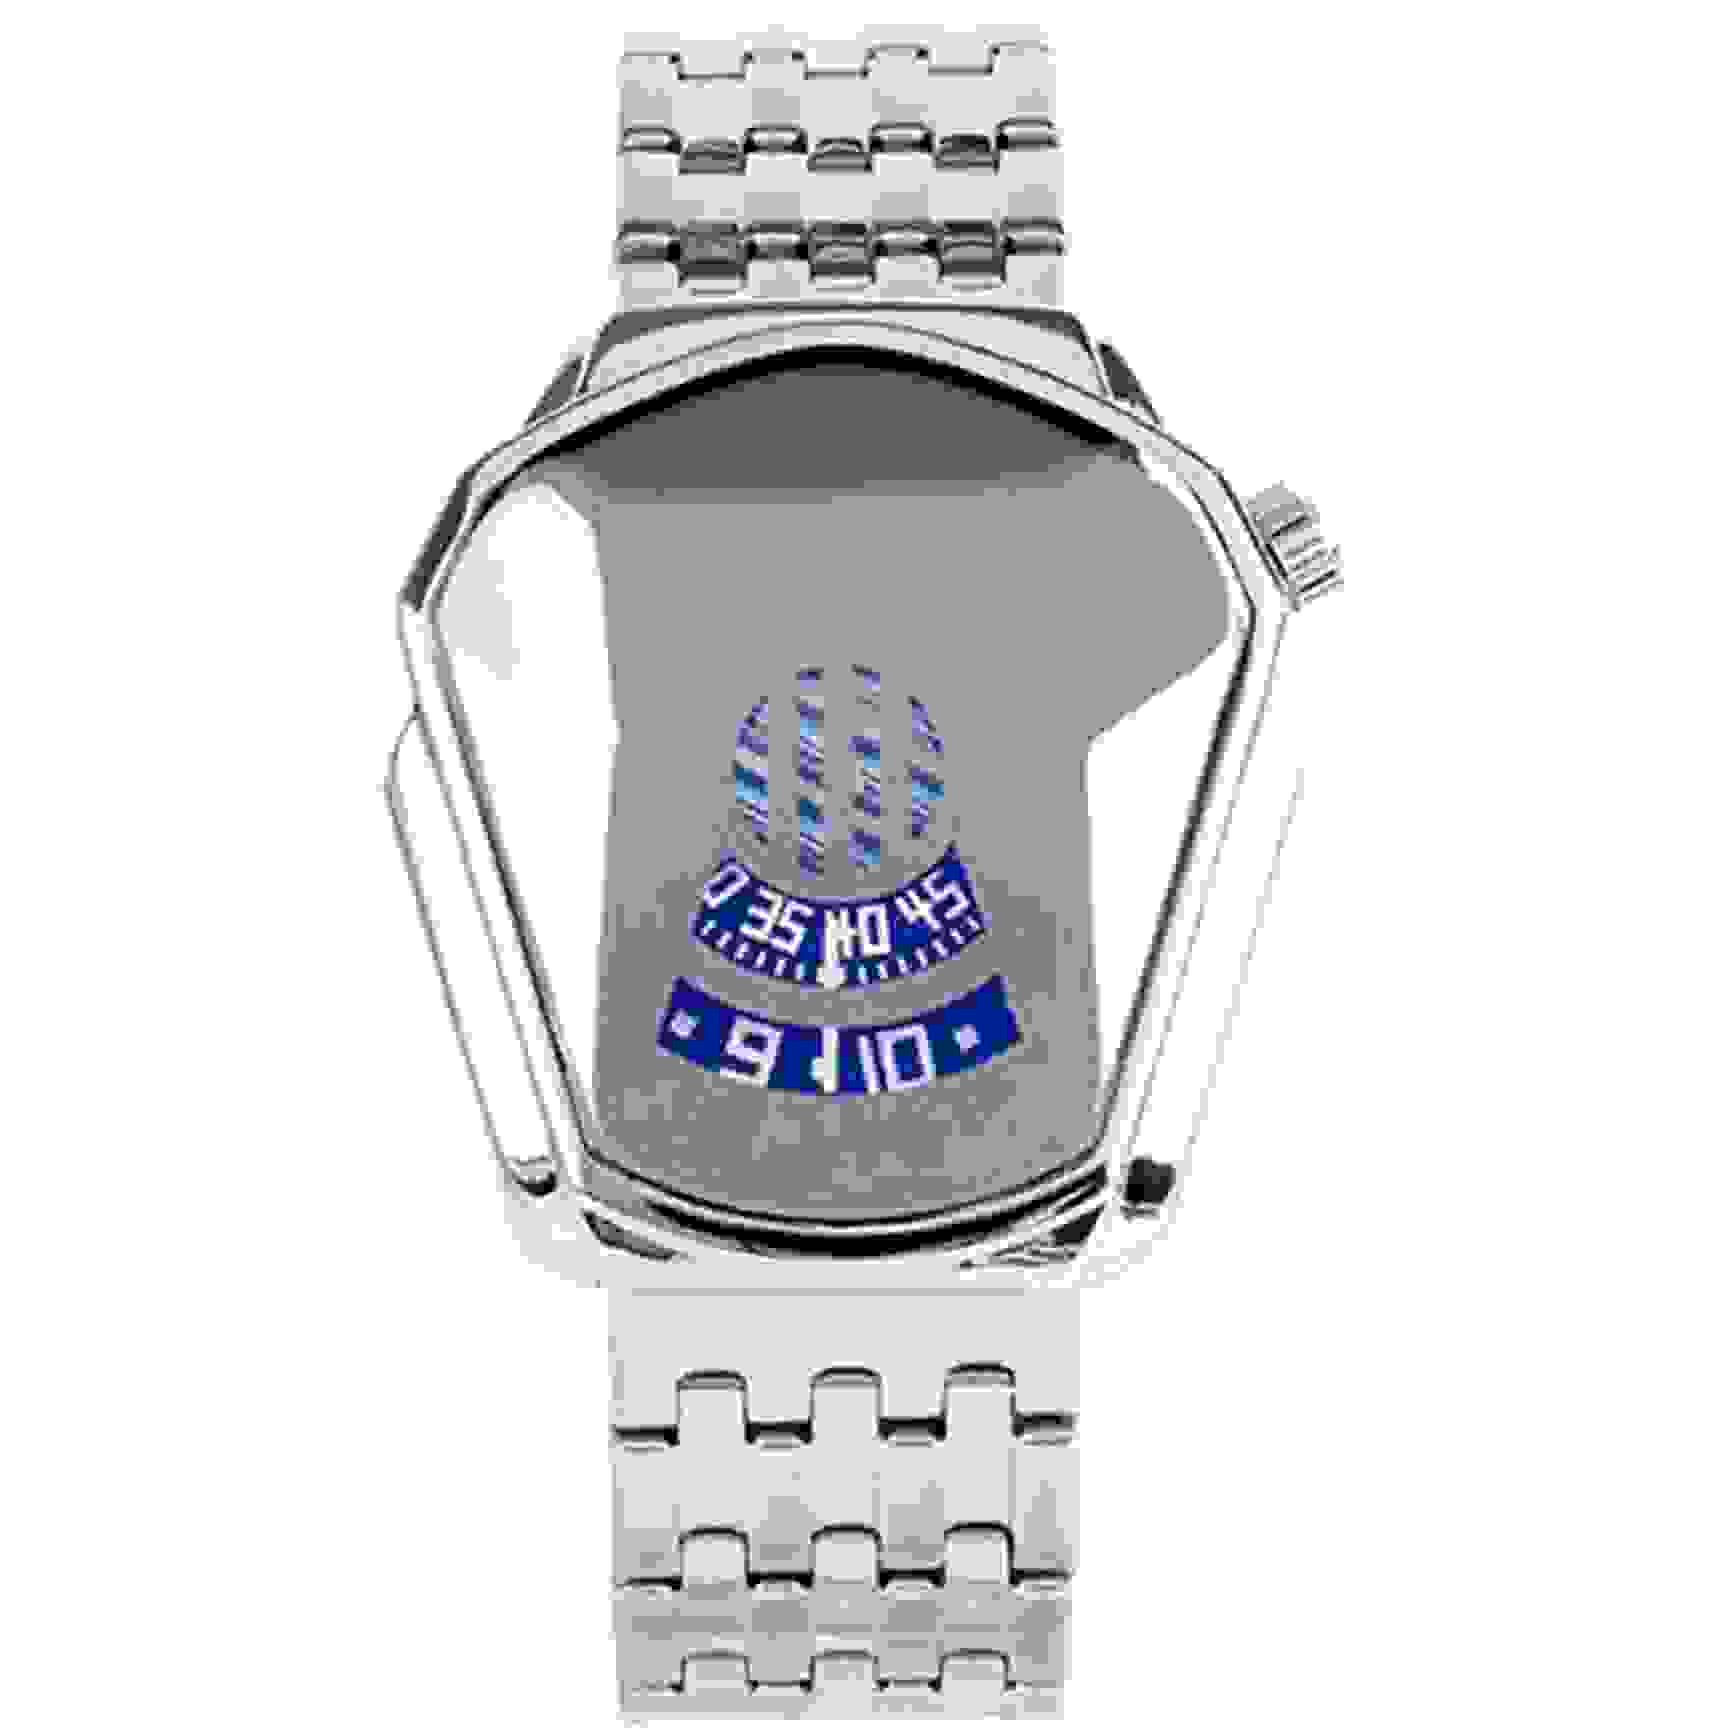 LOCOMOTIVE WATCH UNIQUE DESIGN PURE STAINLESS SOLID GLASS